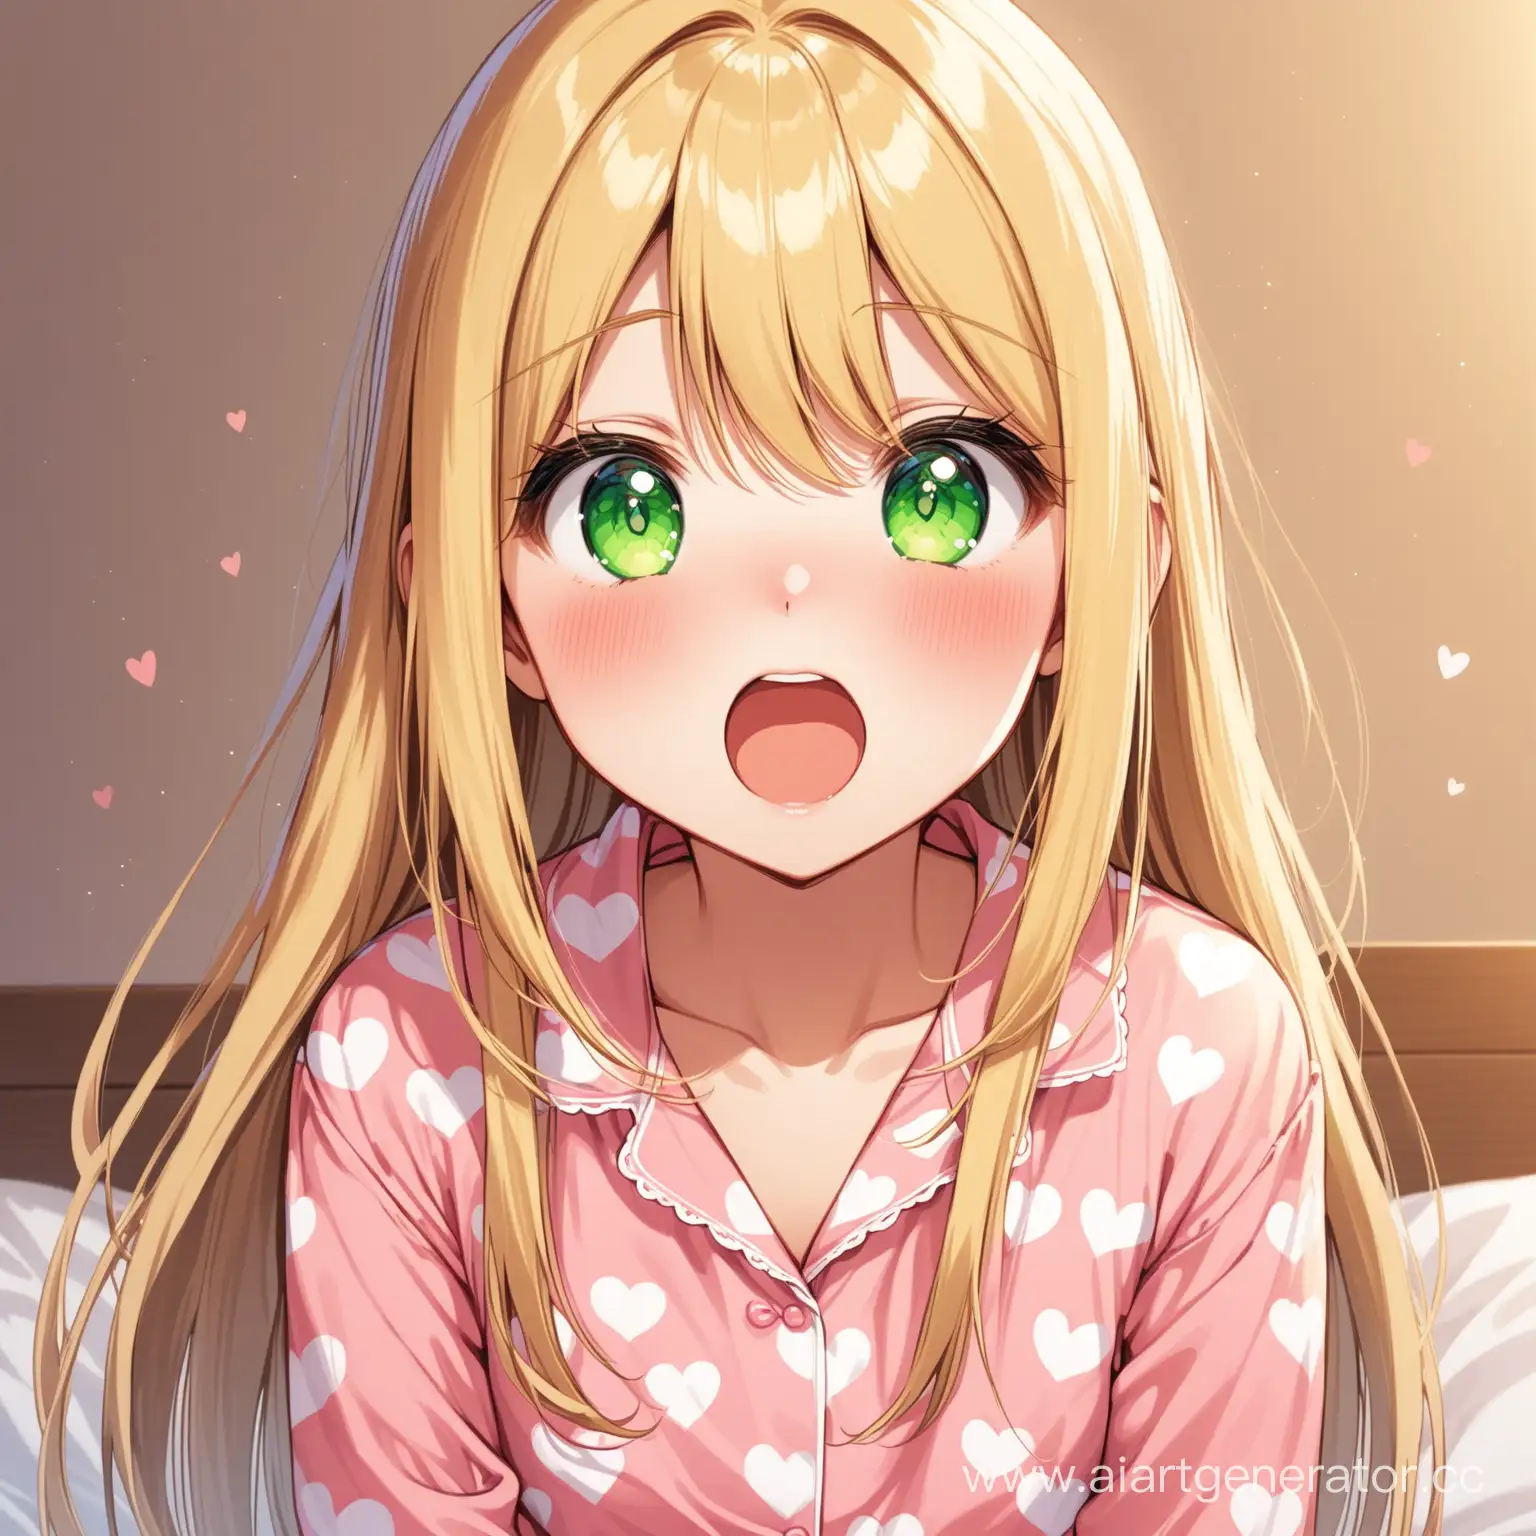 A girl, long straight blonde hair and big green eyes, she is dressed in closed pajamas with a heart pattern, She looks very excited and looks pleading, blushing